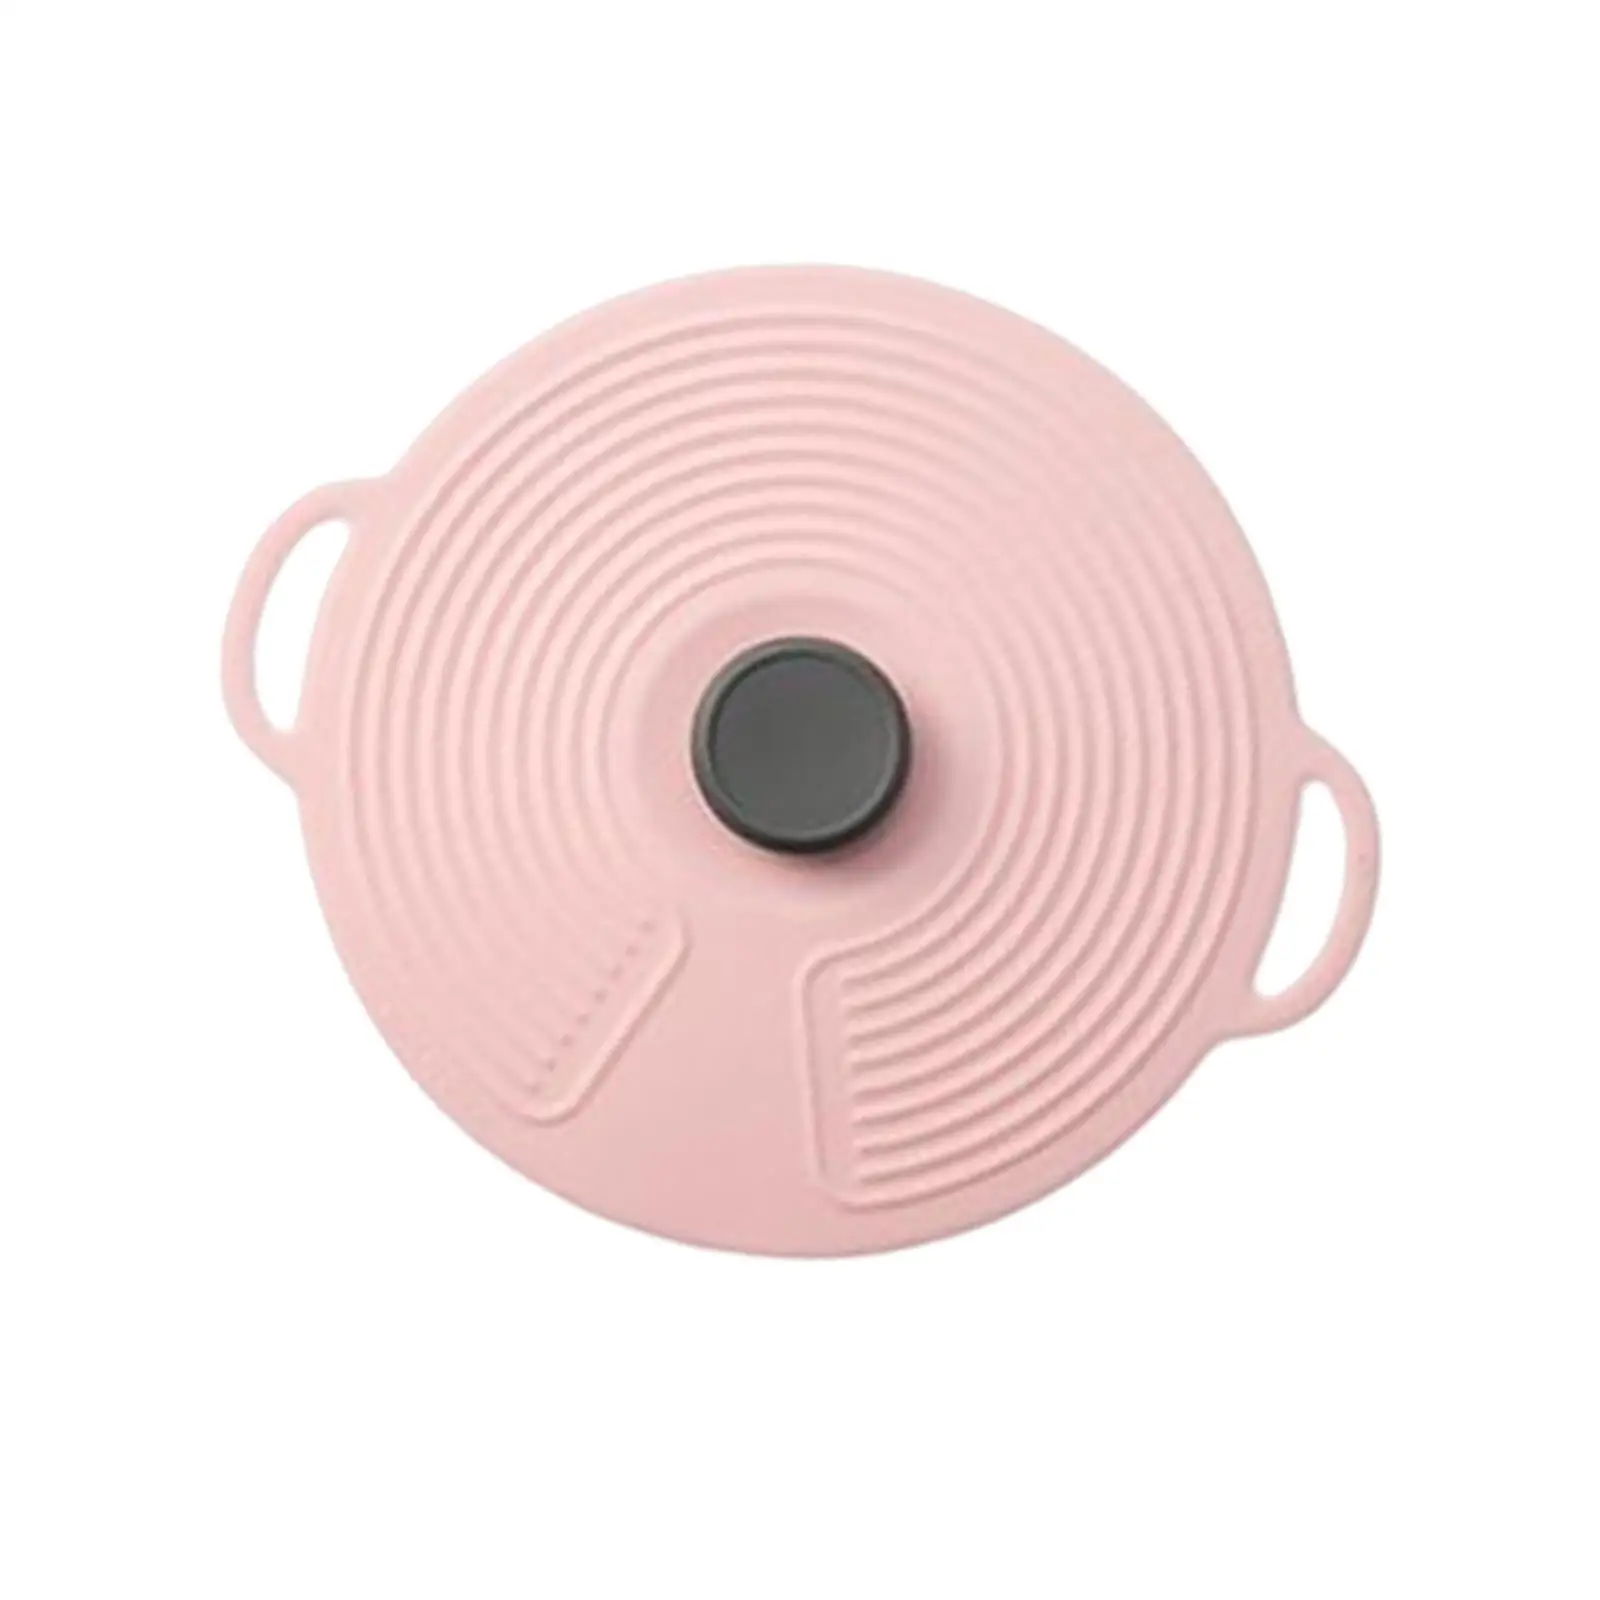 Heat Resistant Silicone Pot Lid with Handle Self Sealing Thicken Suction Seal Cover Food Silicone Cover for Cups Oven Bowls Pots